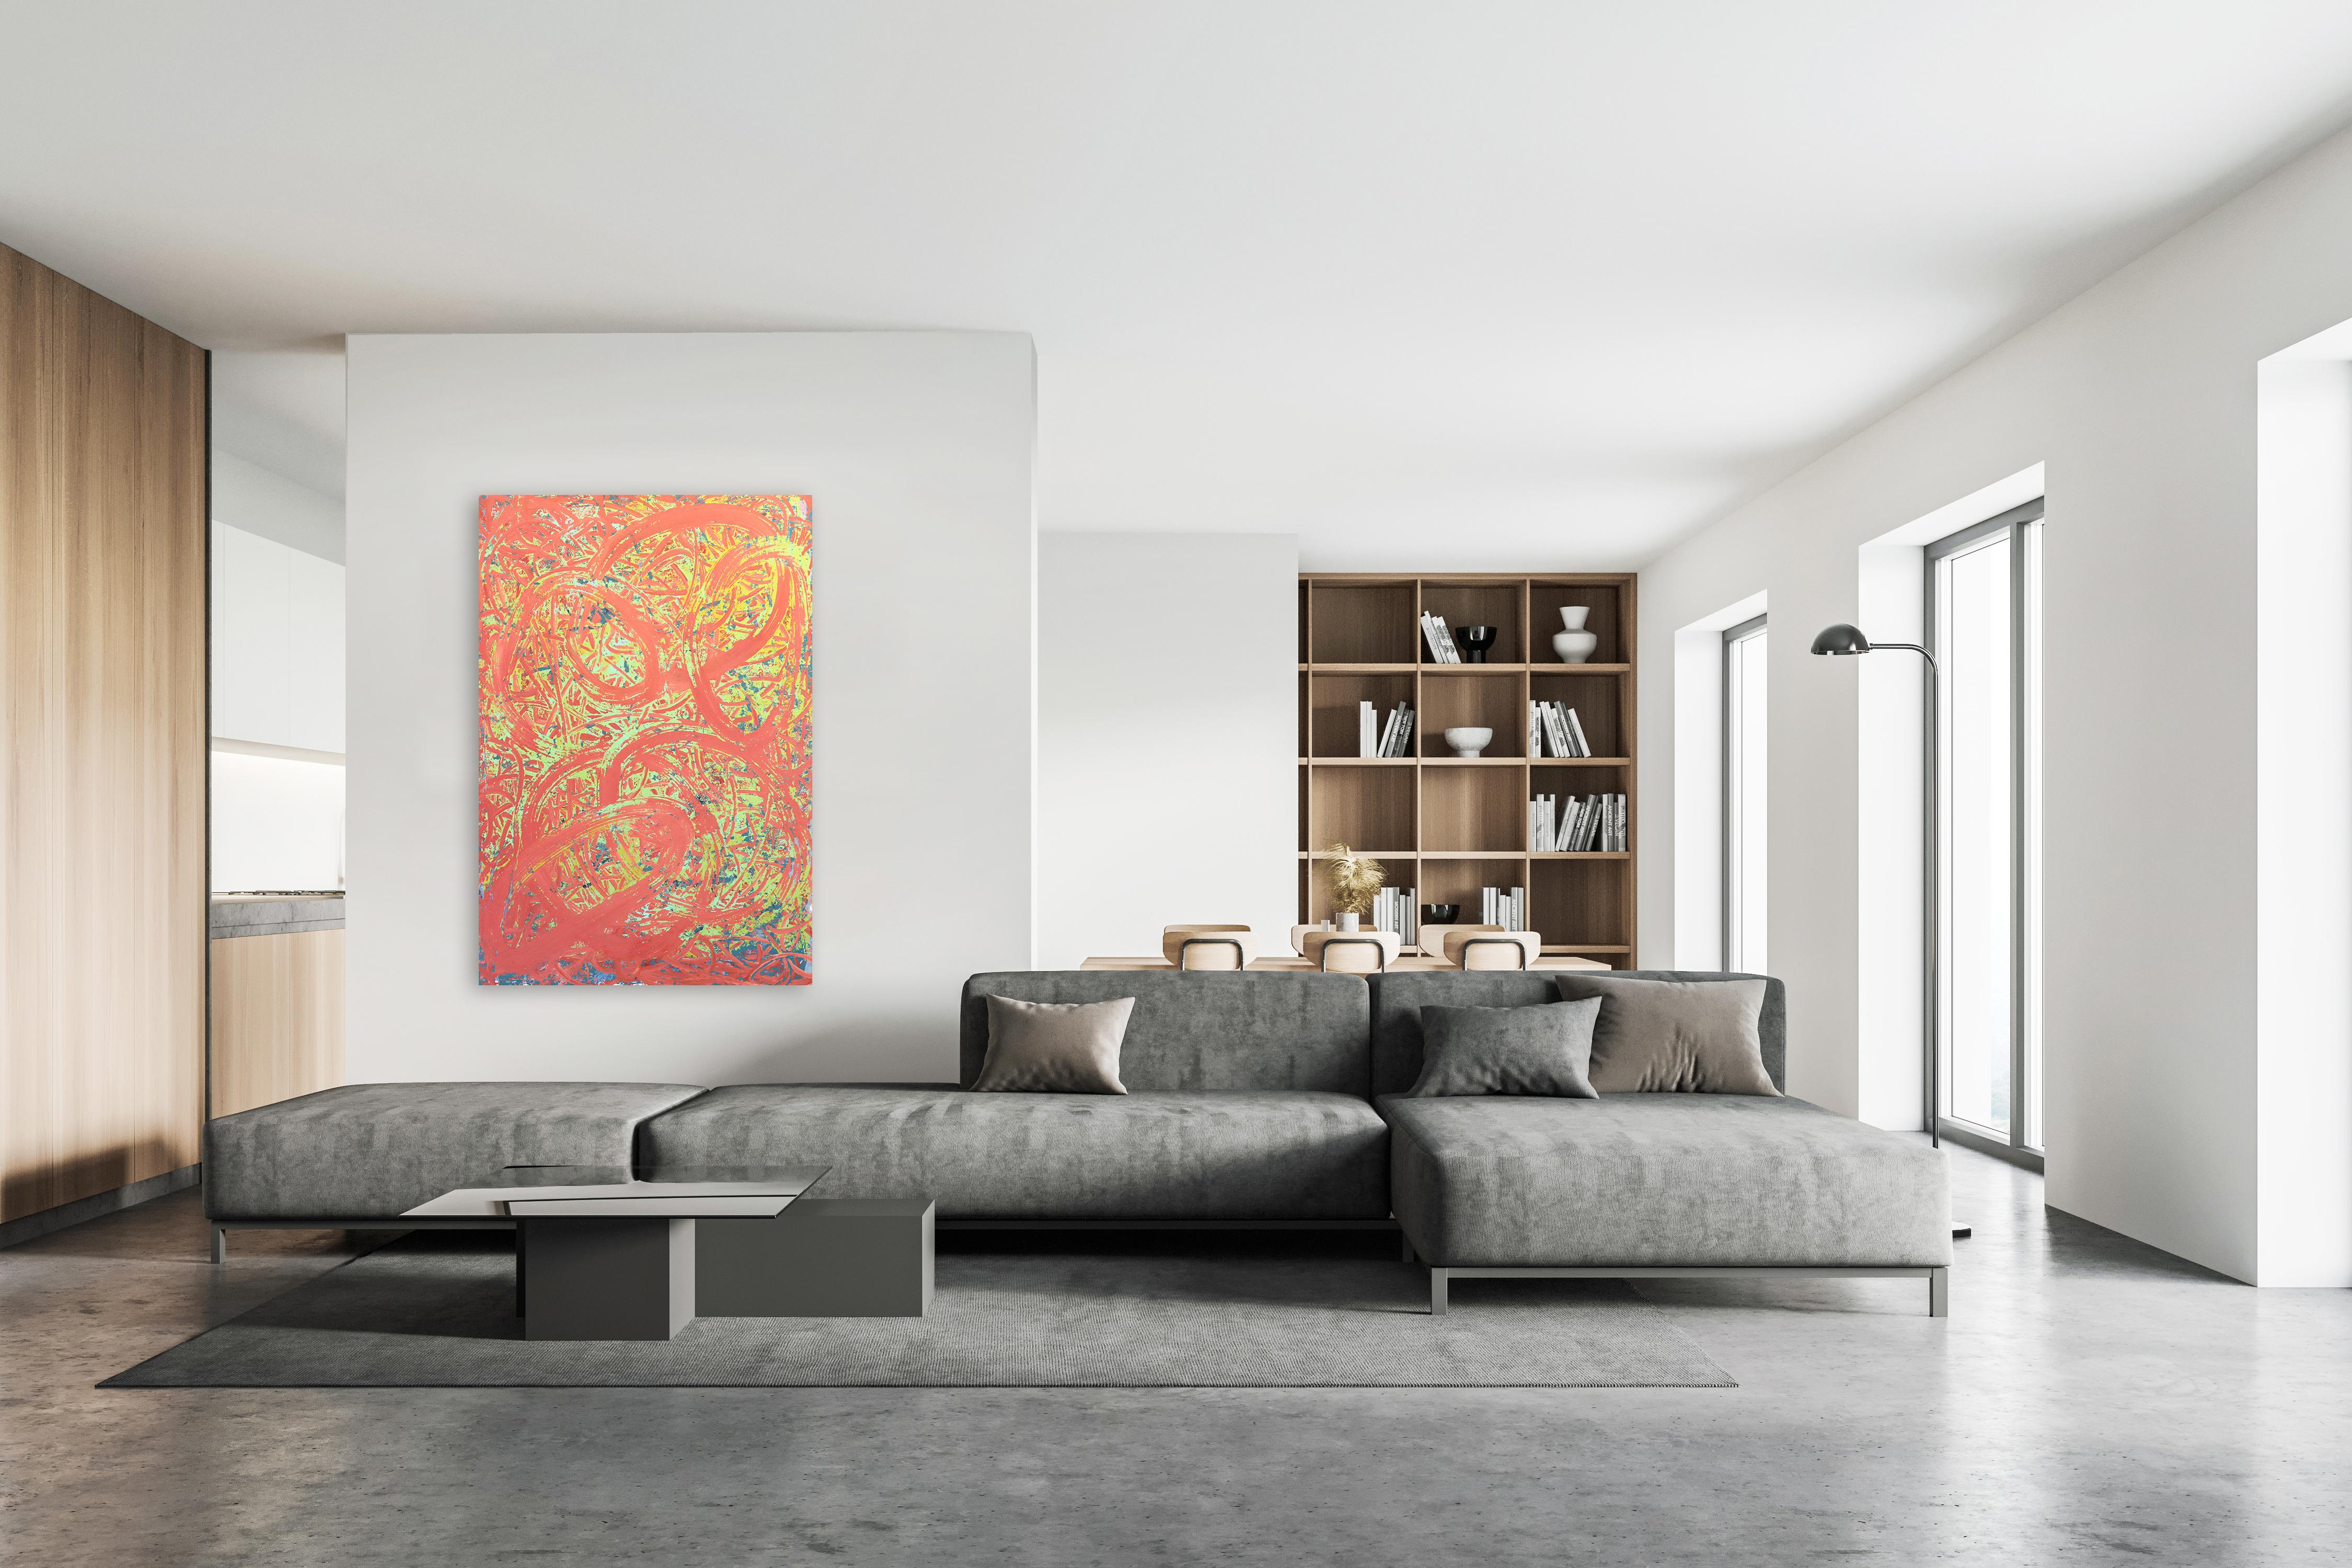 A636 - Big Canvas Art Large Colorful Original Abstract Painting For Sale 6